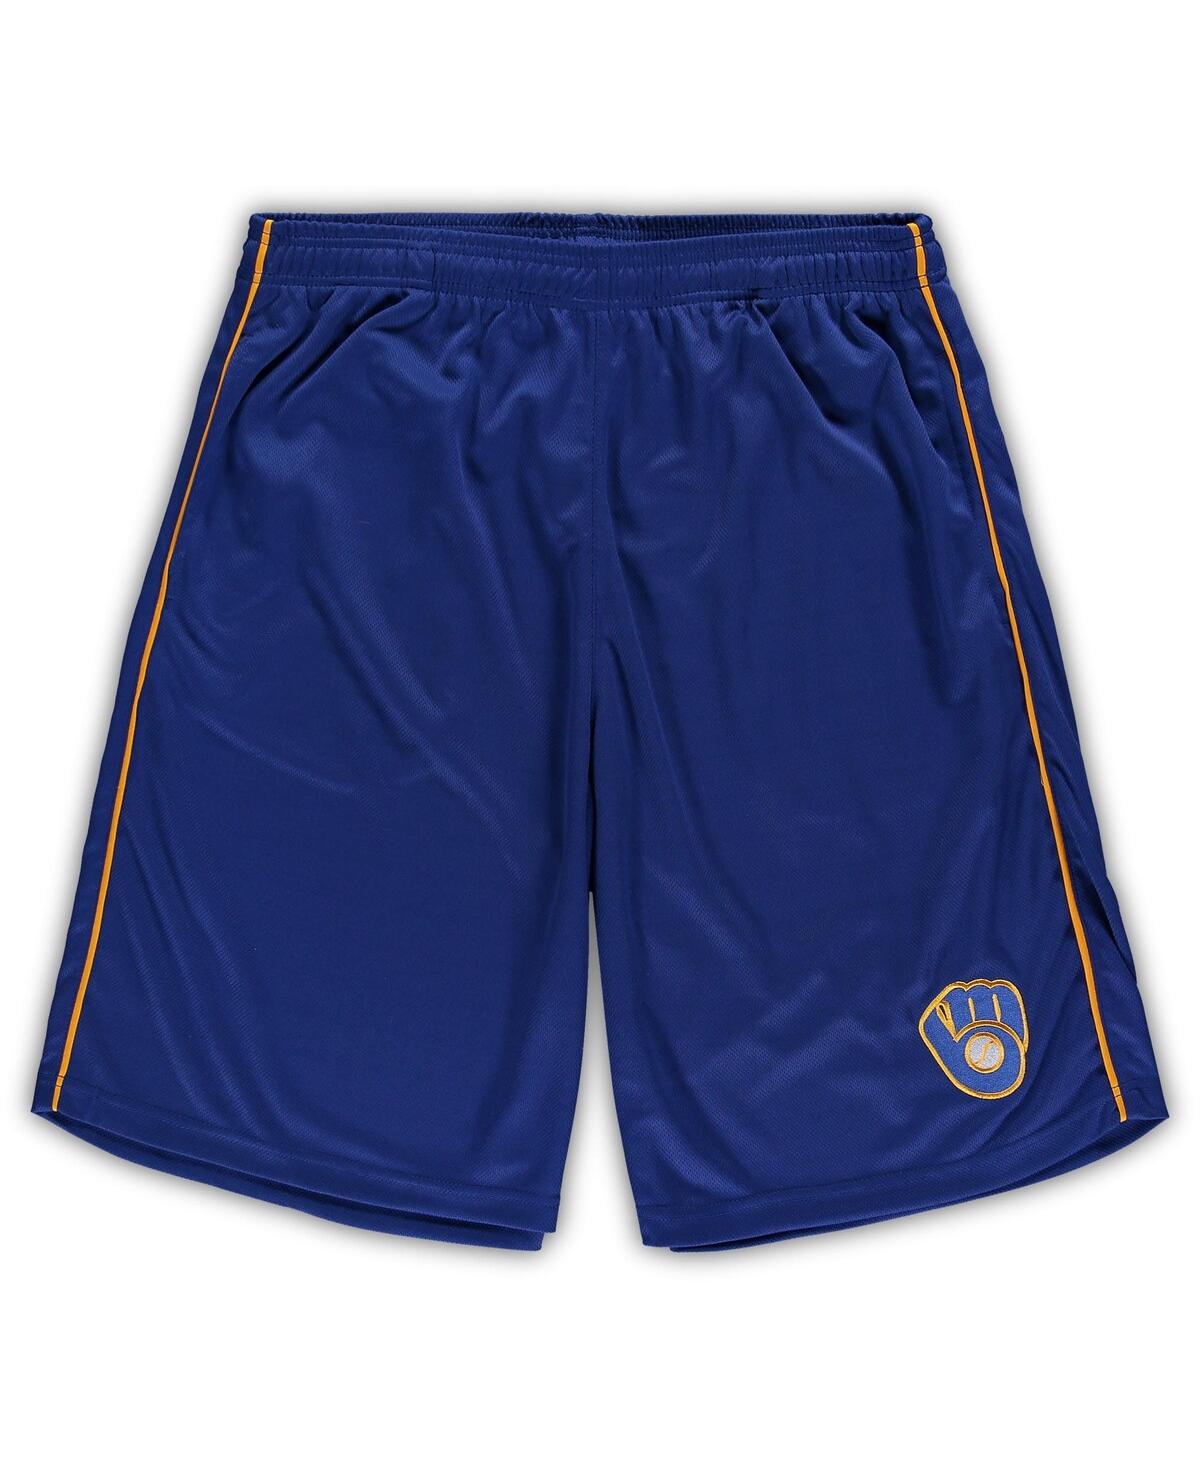 PROFILE MEN'S ROYAL MILWAUKEE BREWERS BIG AND TALL MESH SHORTS